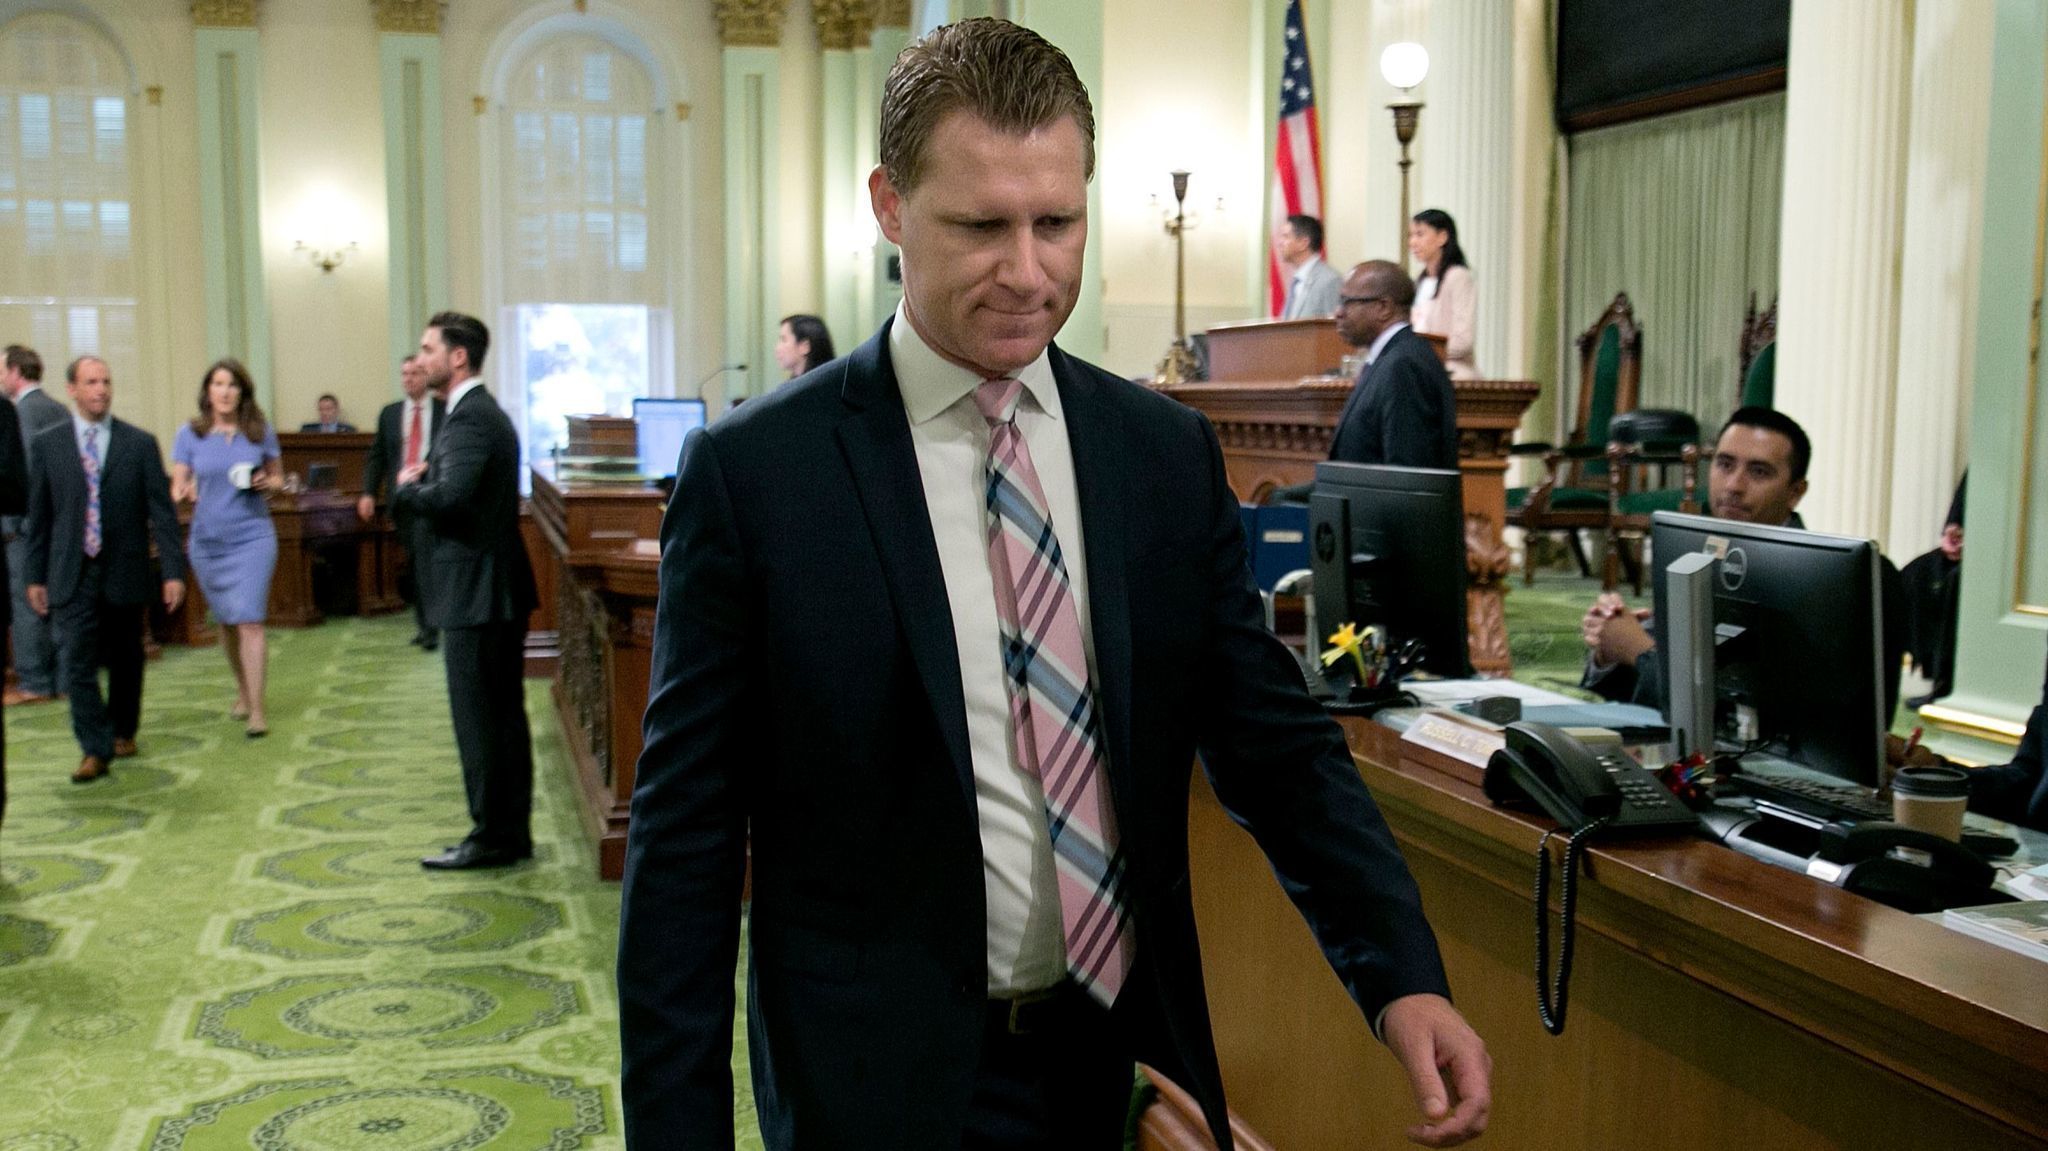 Assembly Republican leader Chad Mayes of Yucca Valley called on Congress to find way to accommodate DACA participants. (Rich Pedroncelli / Associated Press)